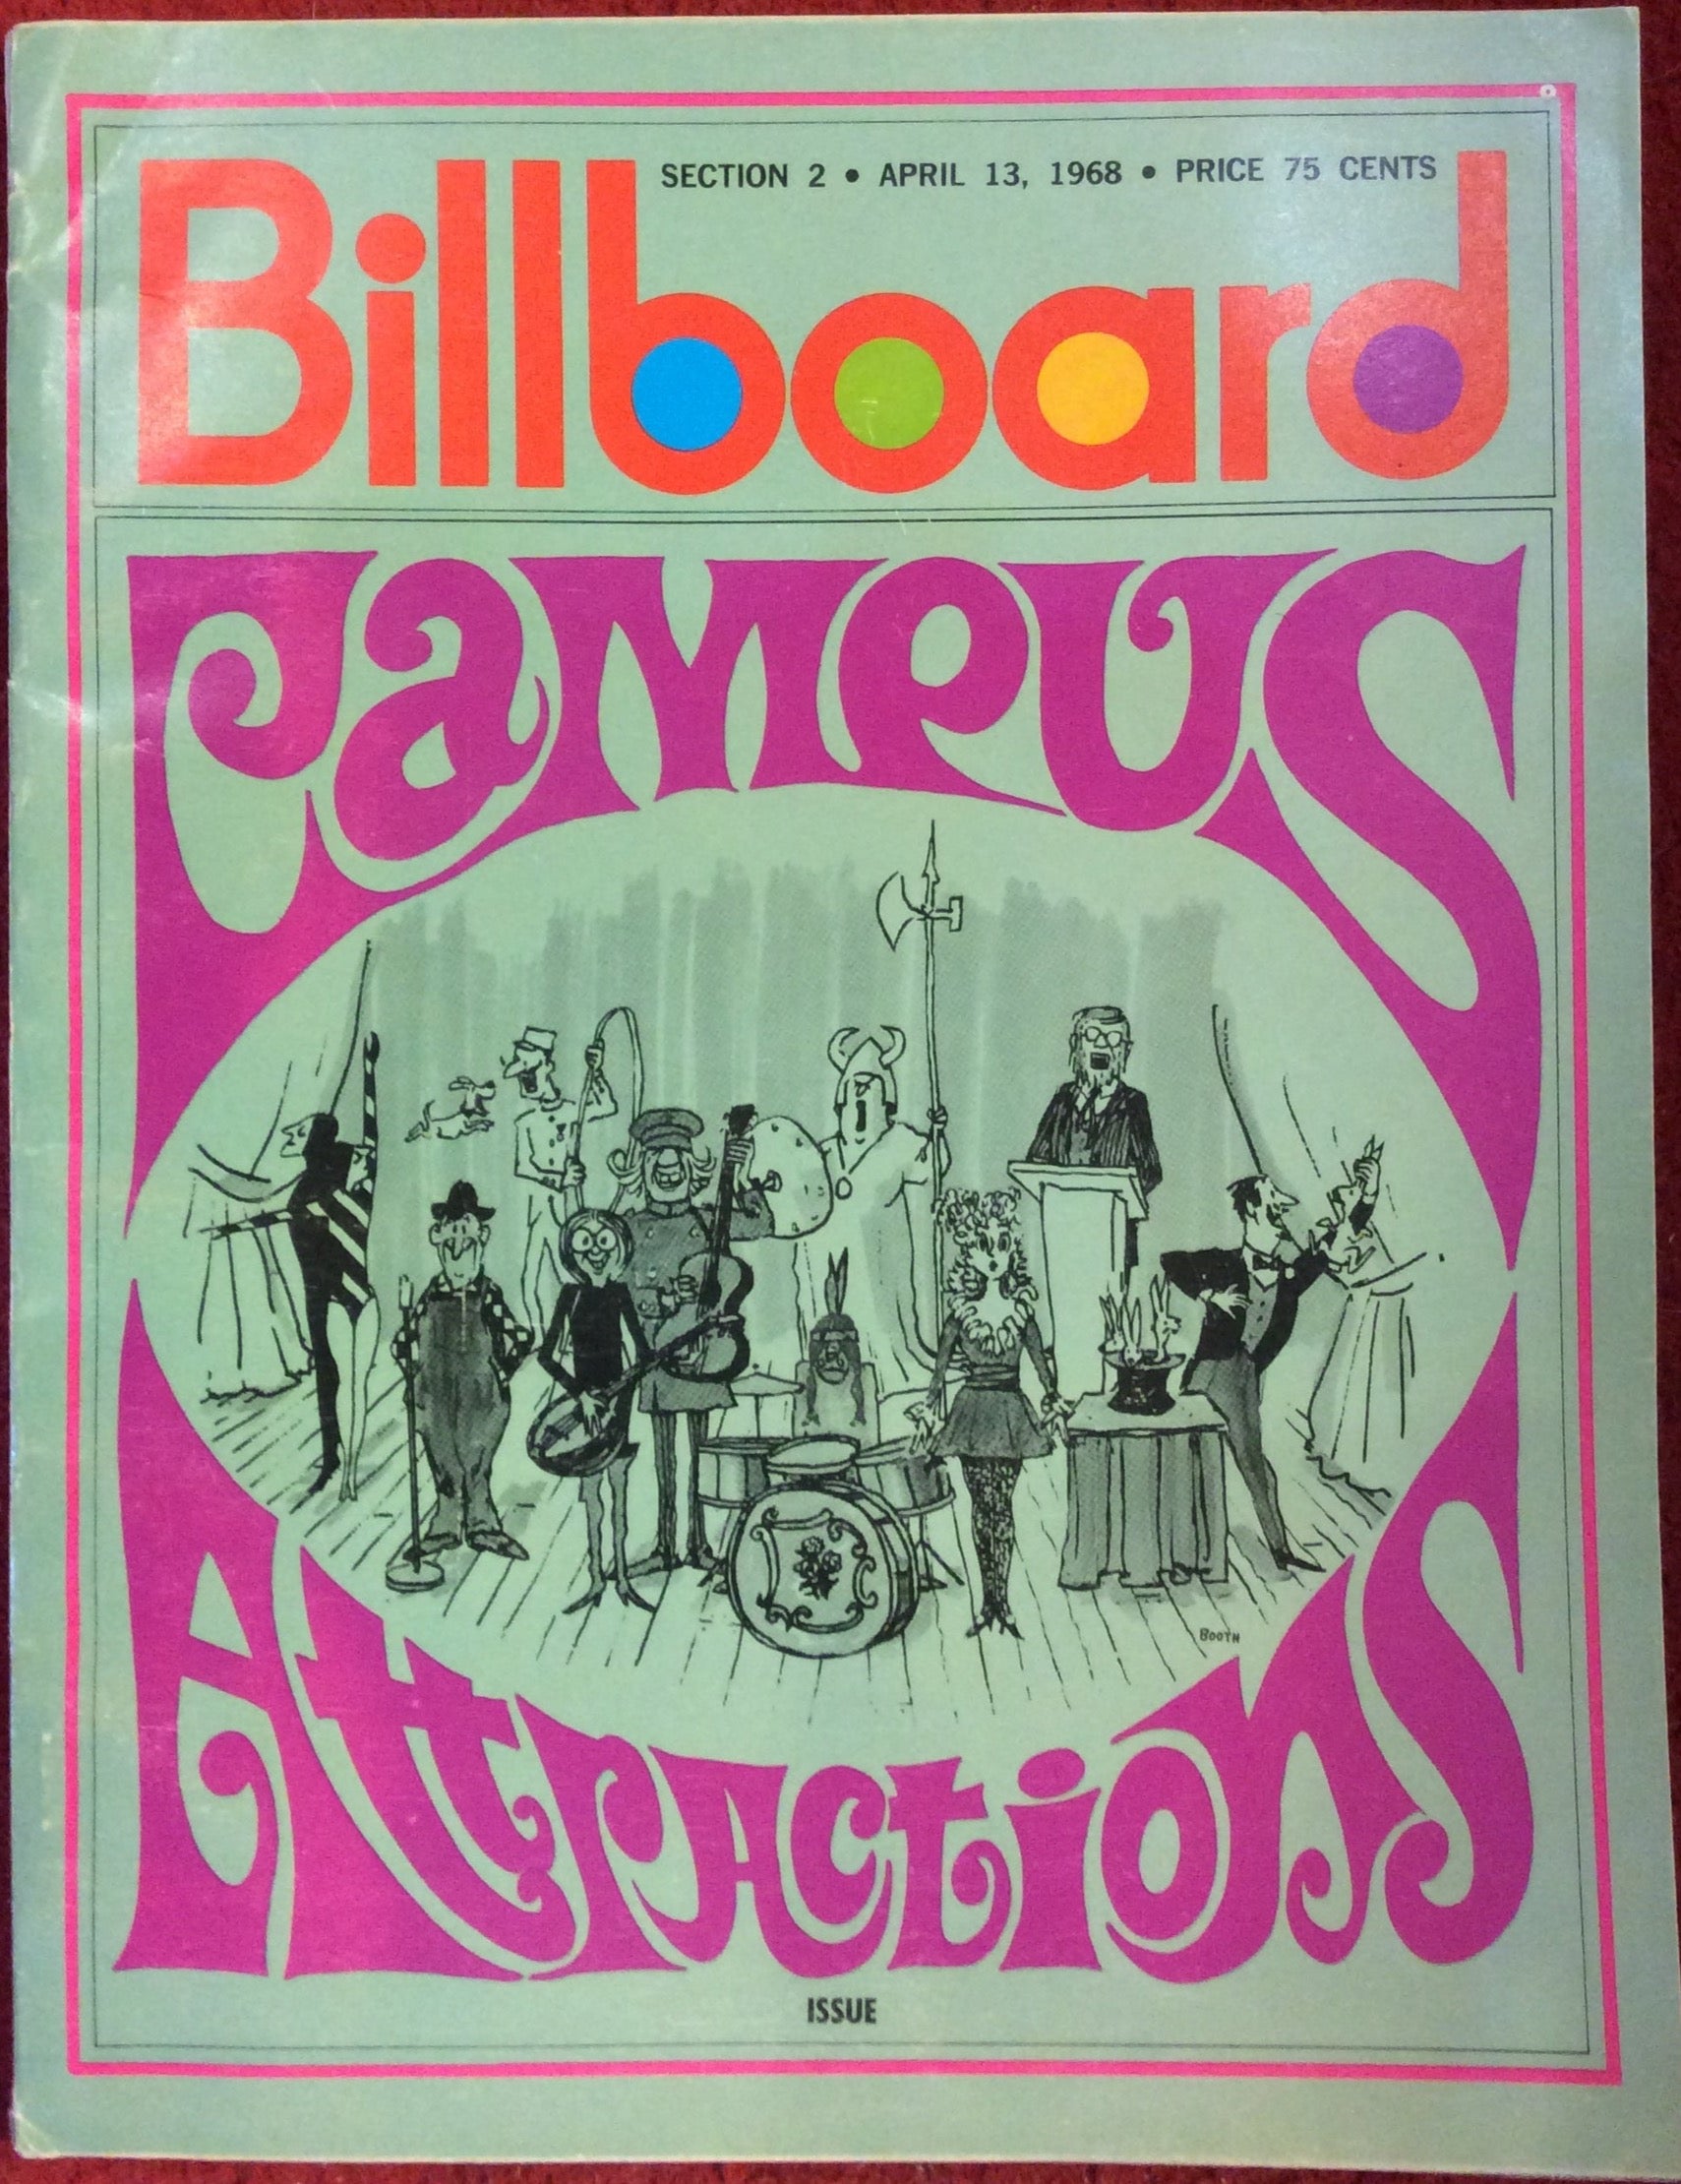 Billboard Magazine, Campus Attractions Issue, April 13th, 1968*